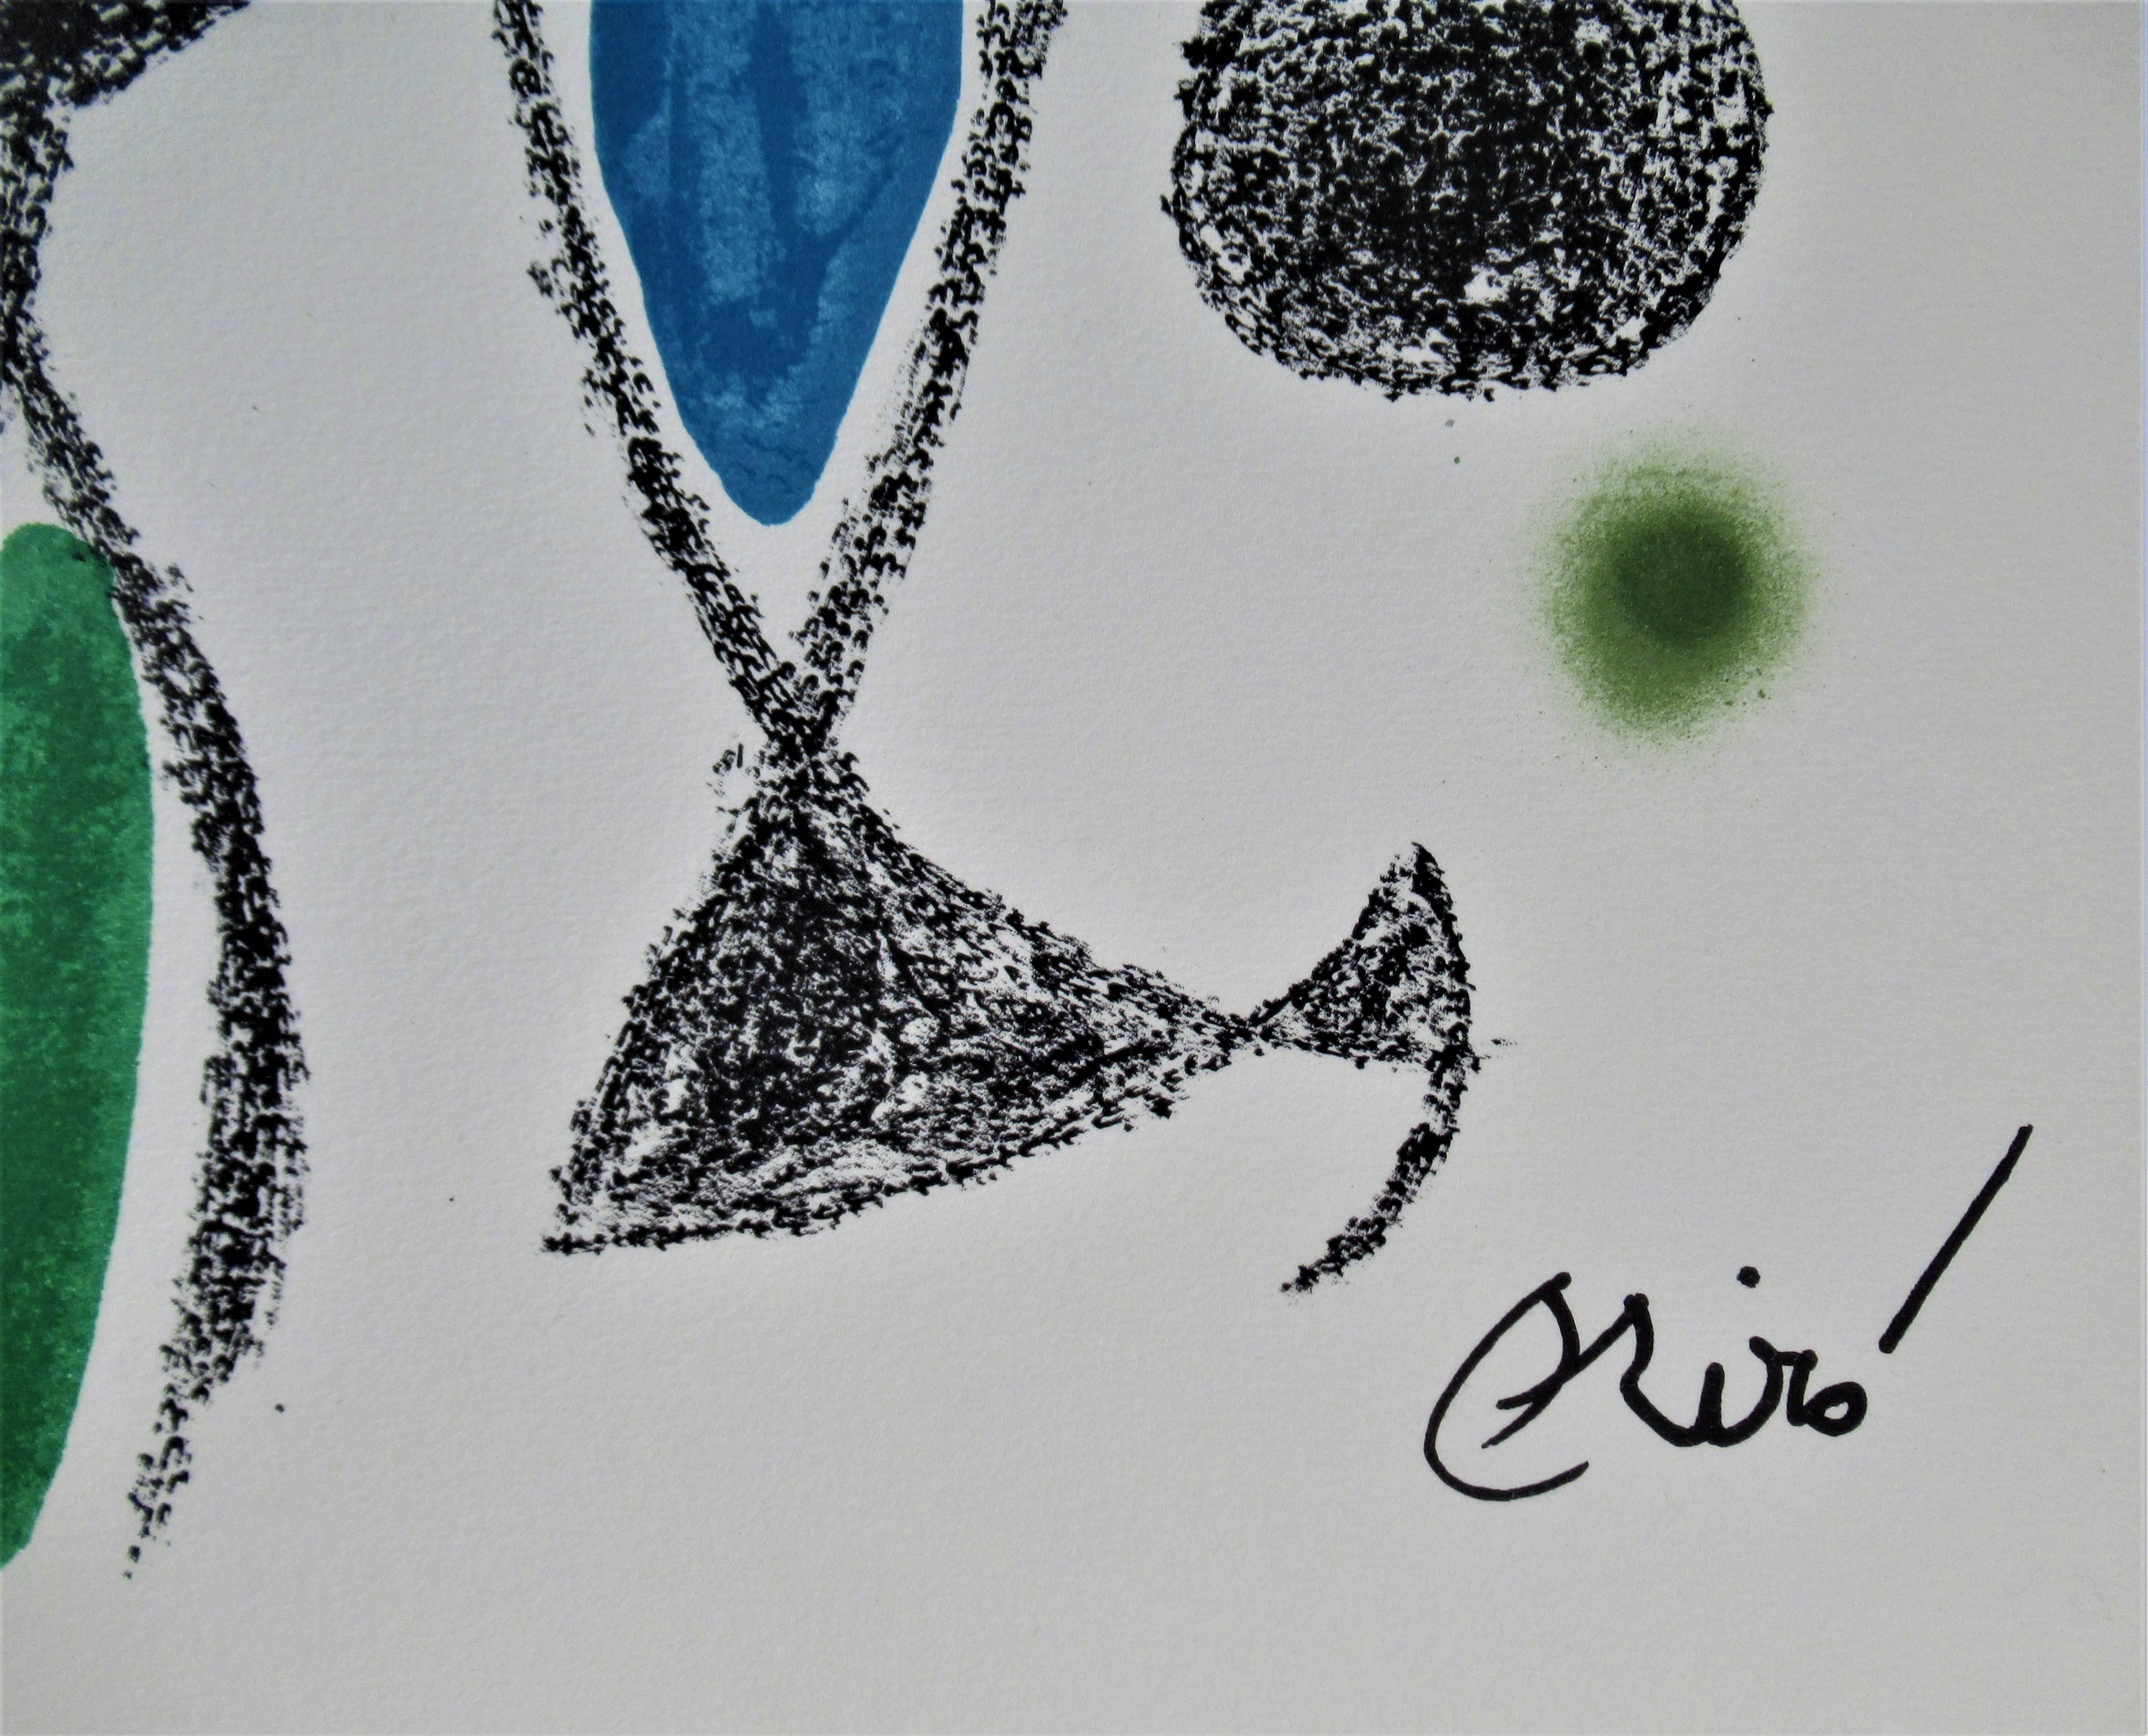 Artist:	Joan Miro (Spanish, 1893-1983)
Title:	Maravillas Con Variations Acrosticas en el Jardin de Miro
Year:	1975
Medium:	Color lithograph
Edition:	Unumbered as issued
Paper:	Wove Guarro
Paper size: 19.5 x 14 inches
Signature:   Signed in the stone